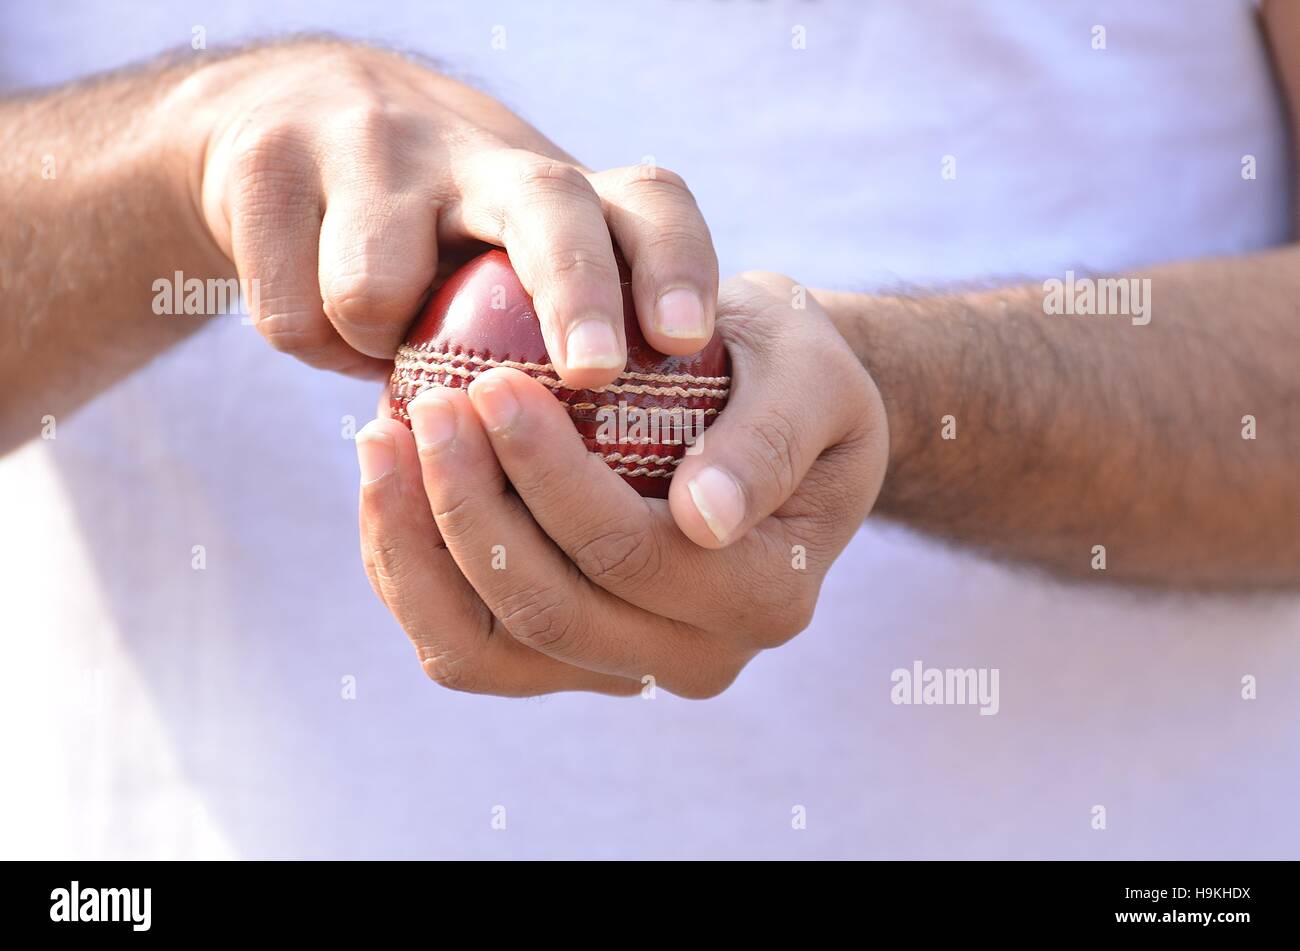 cricket fast bowler going to ball. Stock Photo